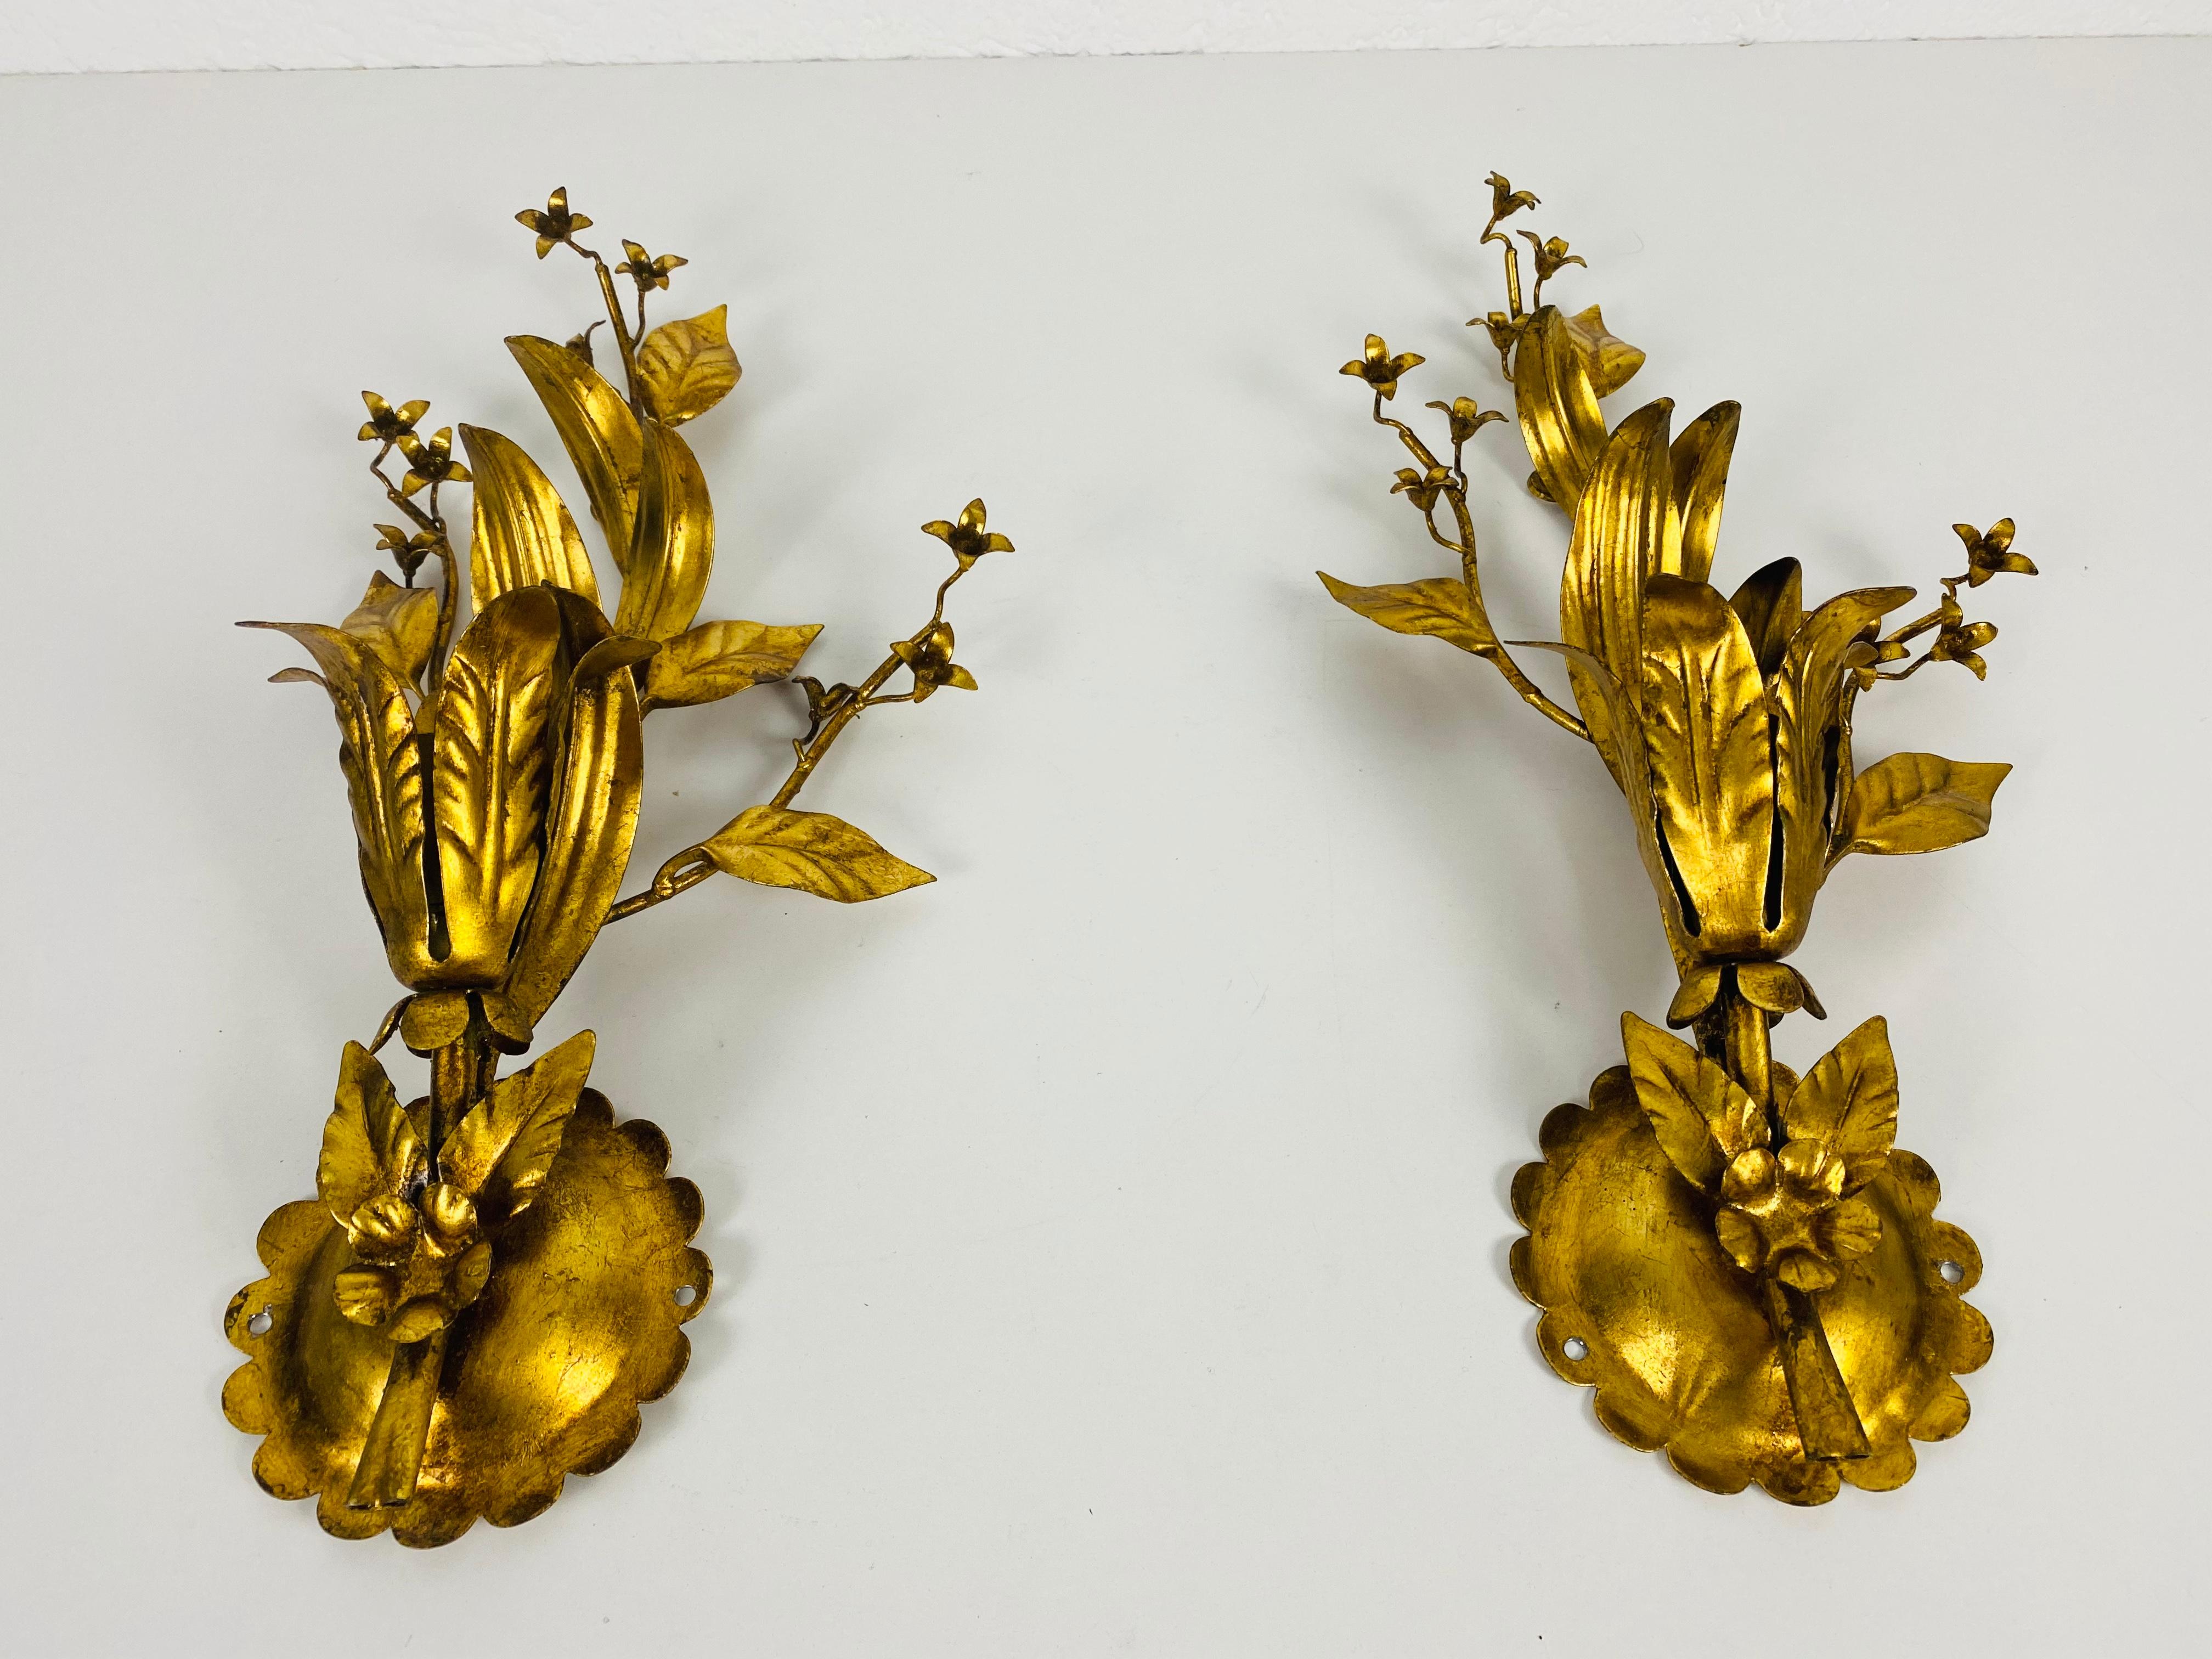 Hollywood Regency Set of 2 Golden Florentine Flower Shape Wall Lamps by Banci, Italy, 1970s